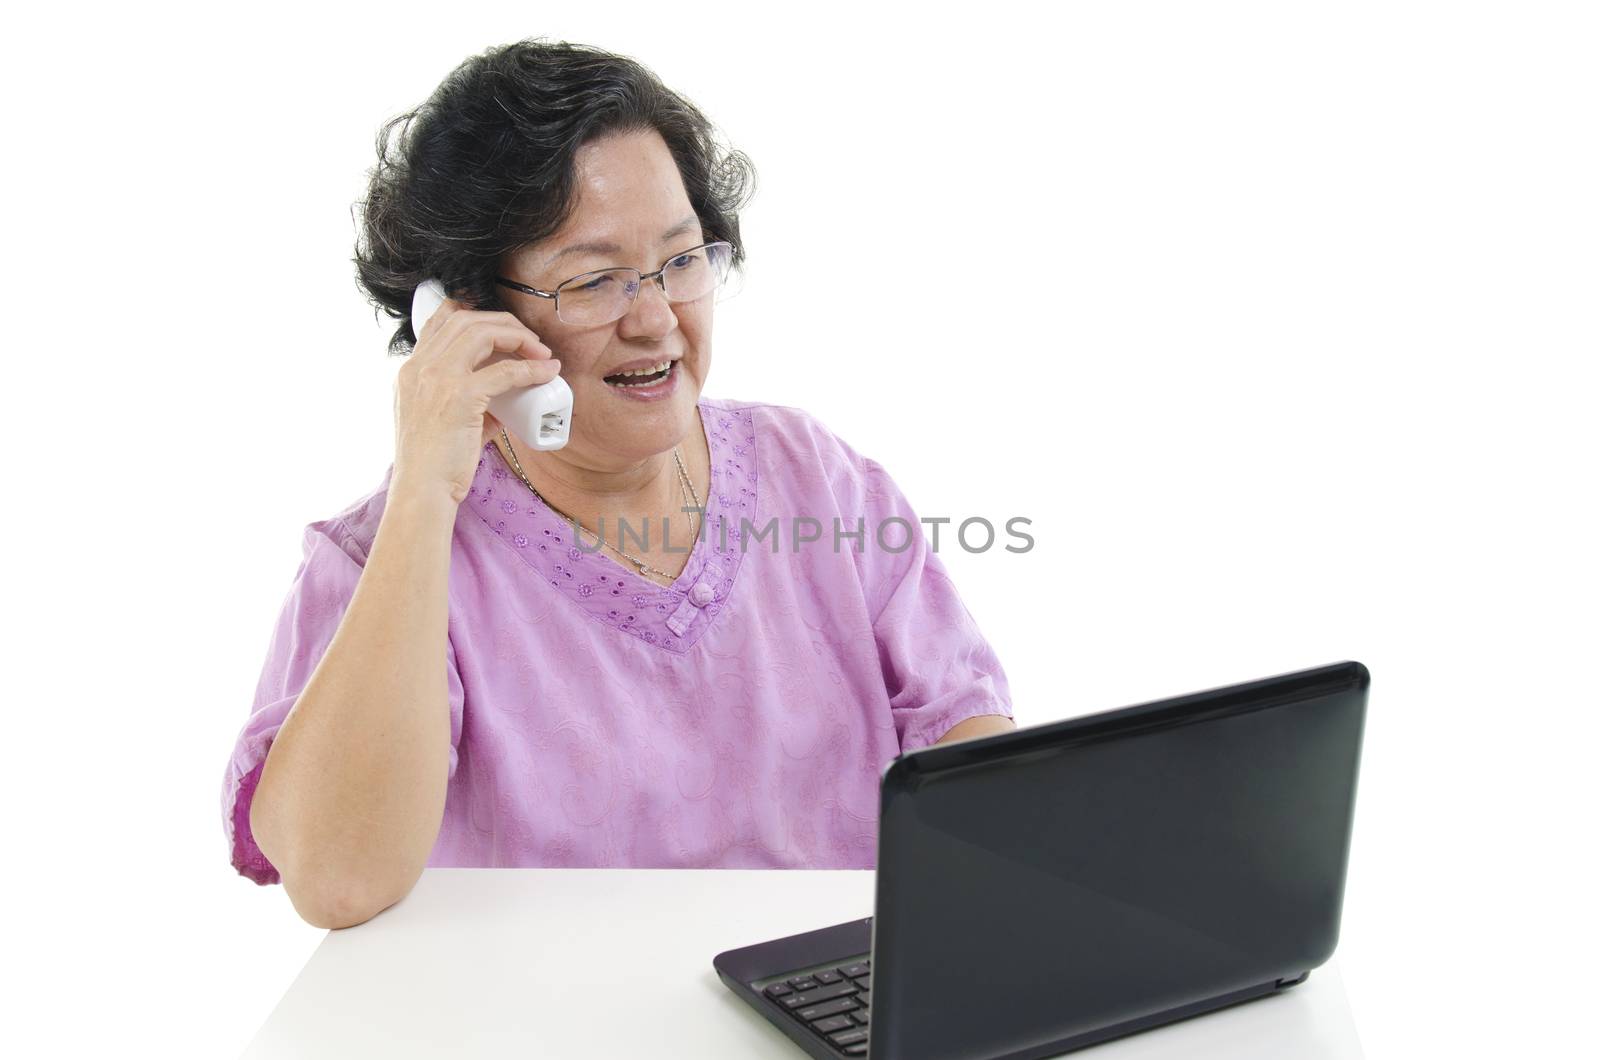 Portrait of modern 60s Asian senior adult woman using laptop computer and calling on telephone, isolated on white background.